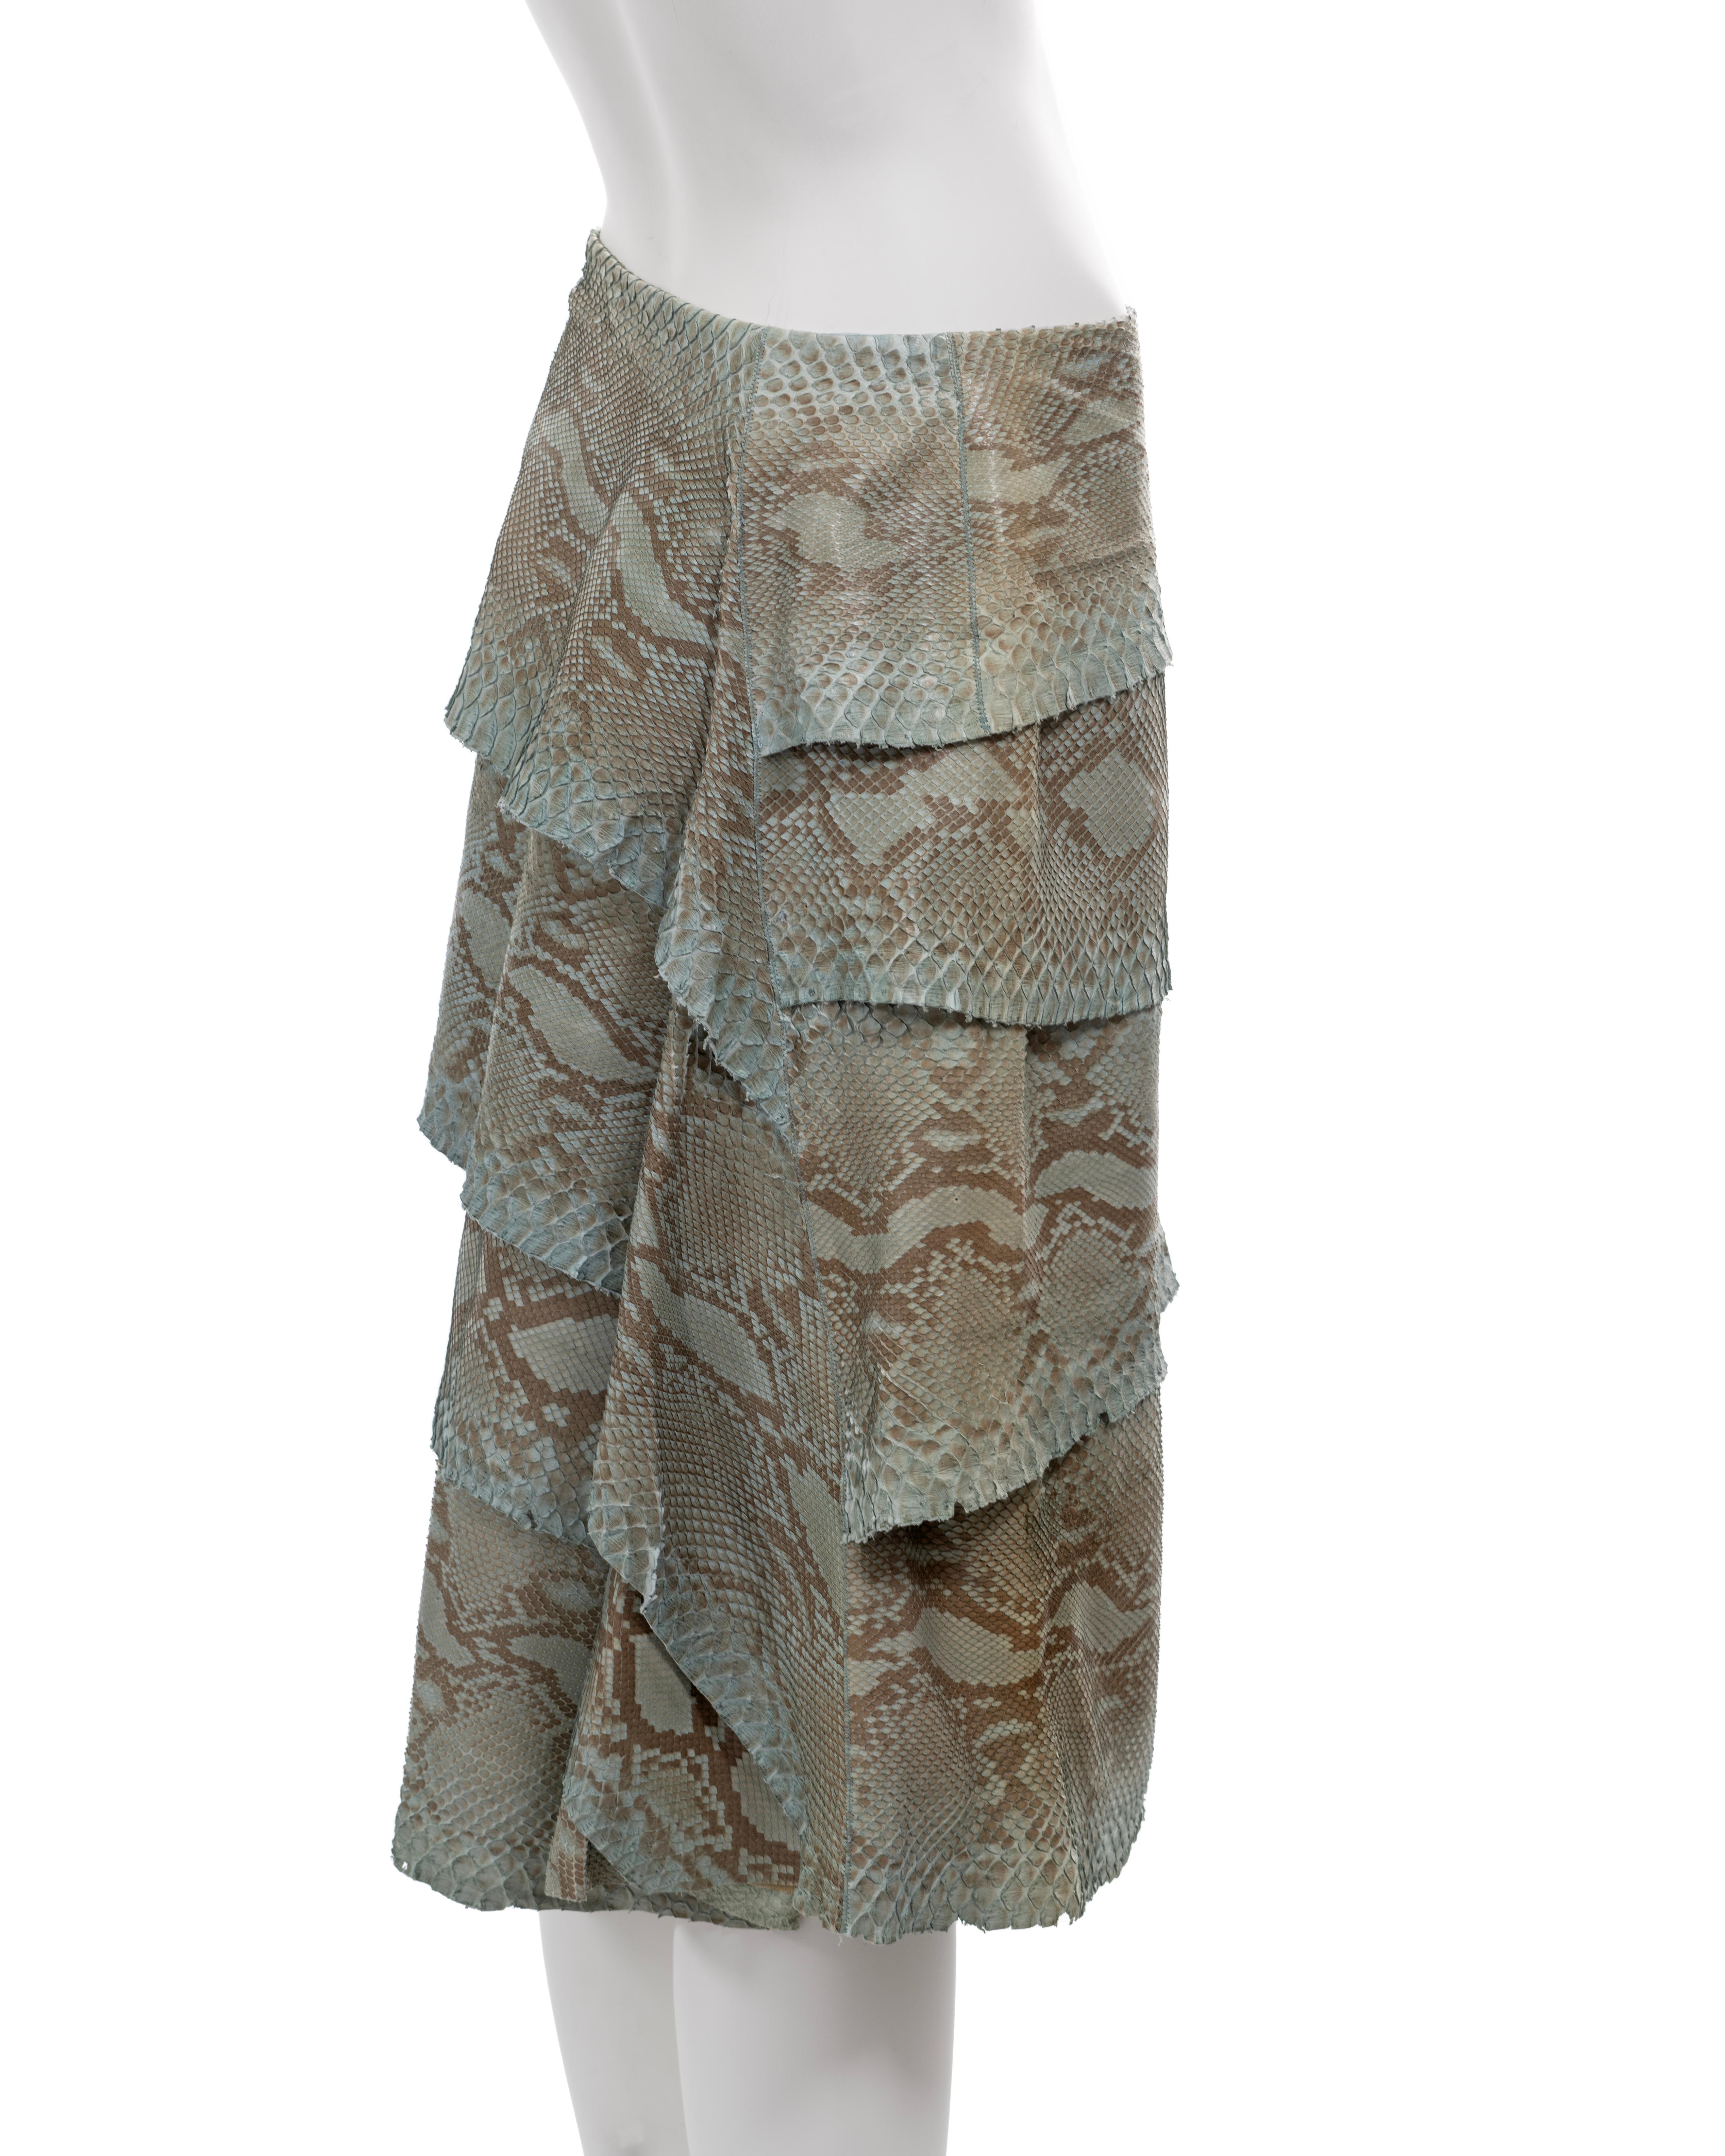 Gianni Versace turquoise python tiered skirt, fw 1999 For Sale 4